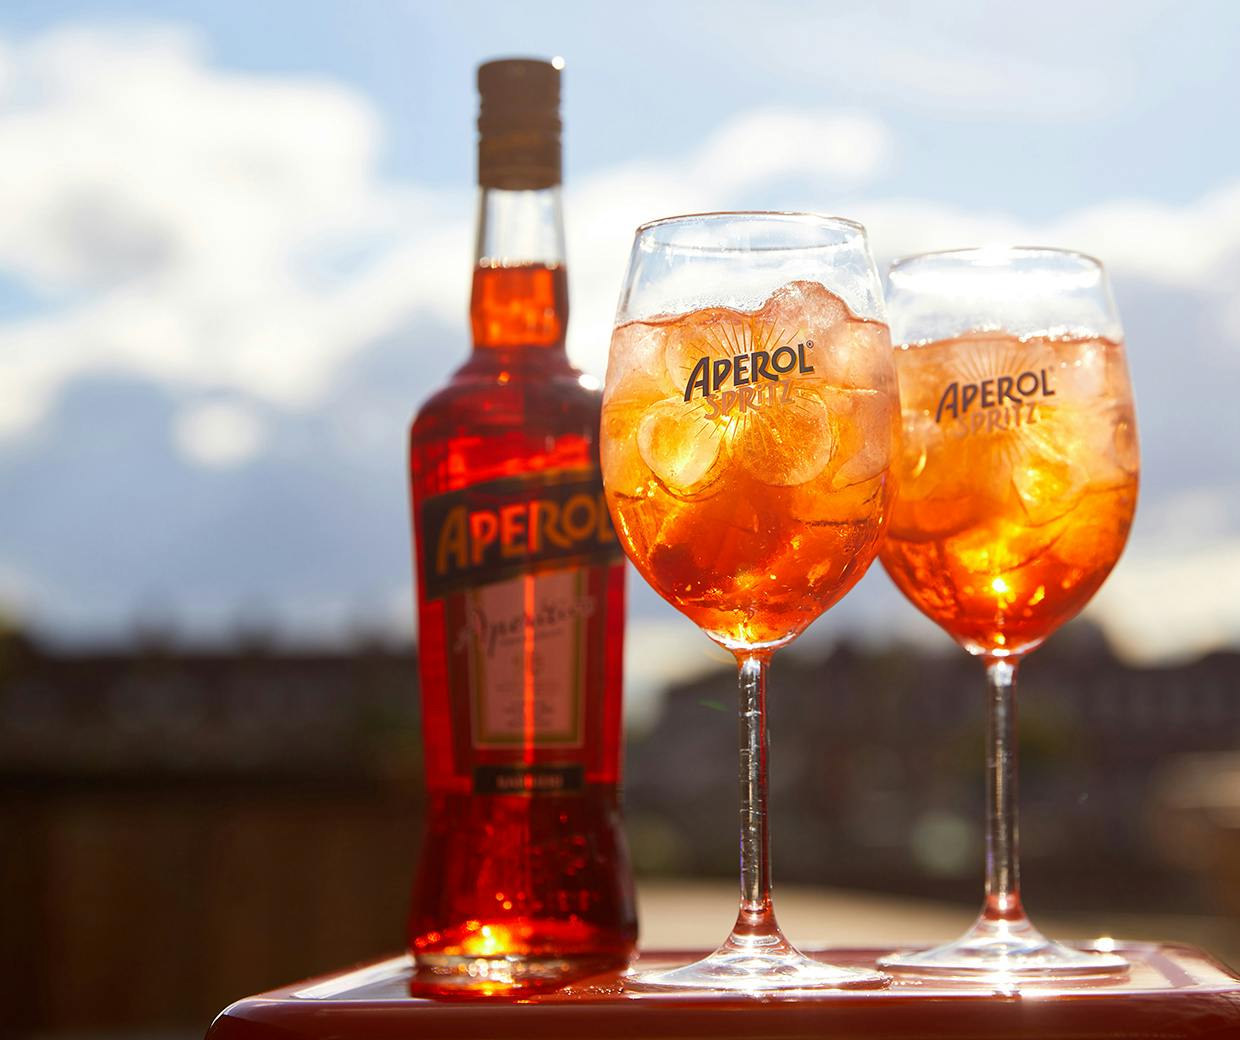 Styre at føre sandhed Meet the marketer behind Aperol's 'monster' growth